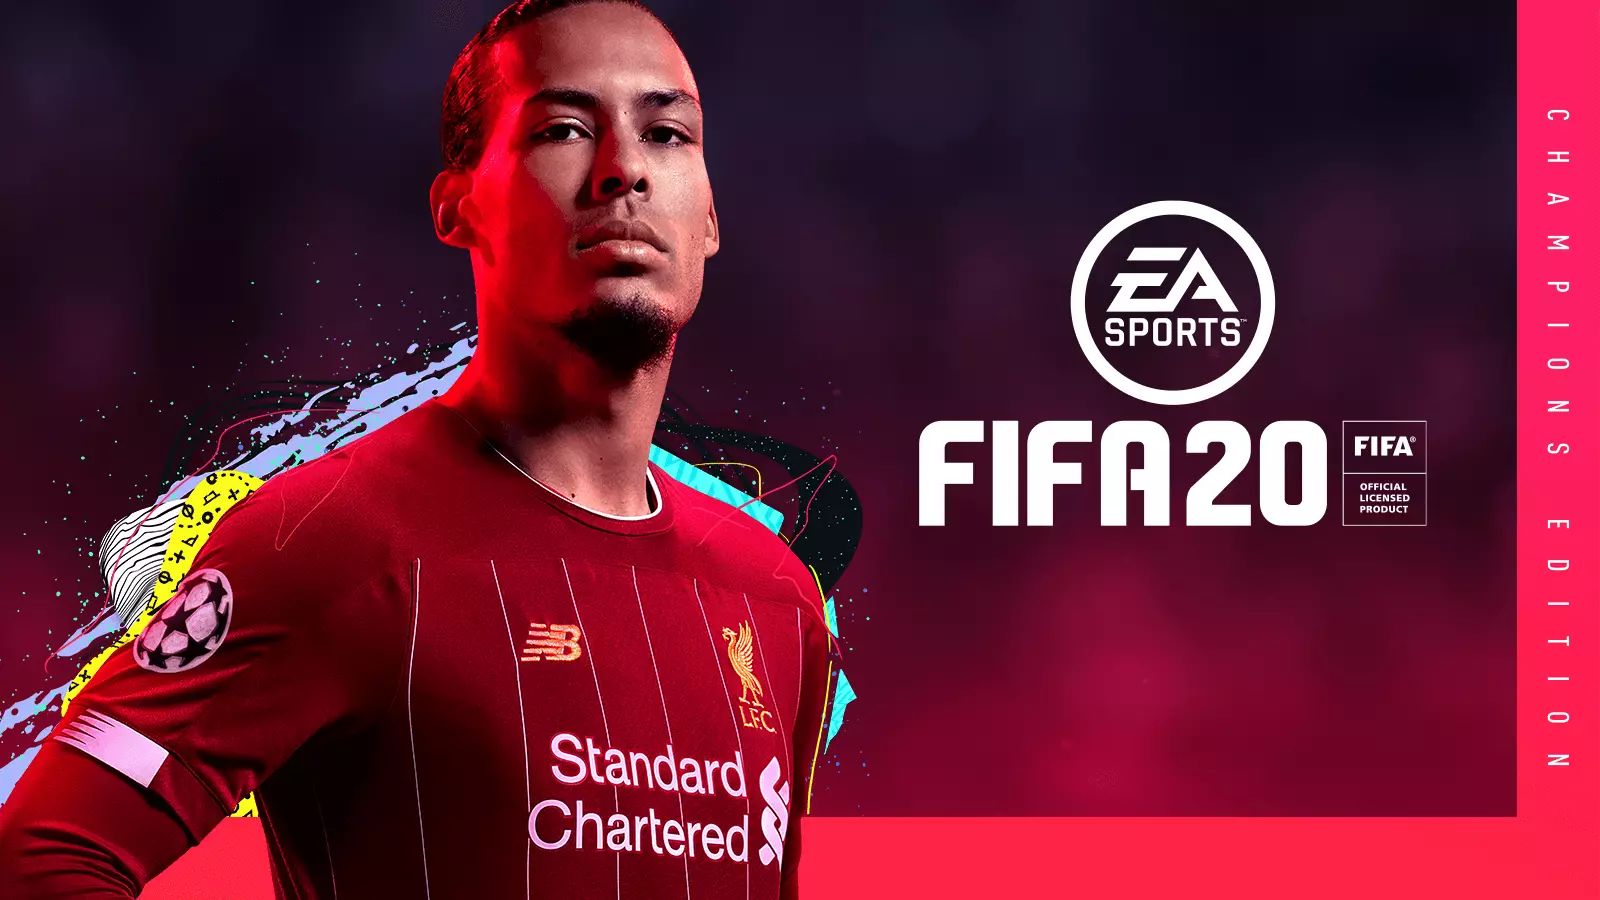 Buy FIFA 20 Cheap: Pre-order For Only £24.99 From GAME With This Online Deal